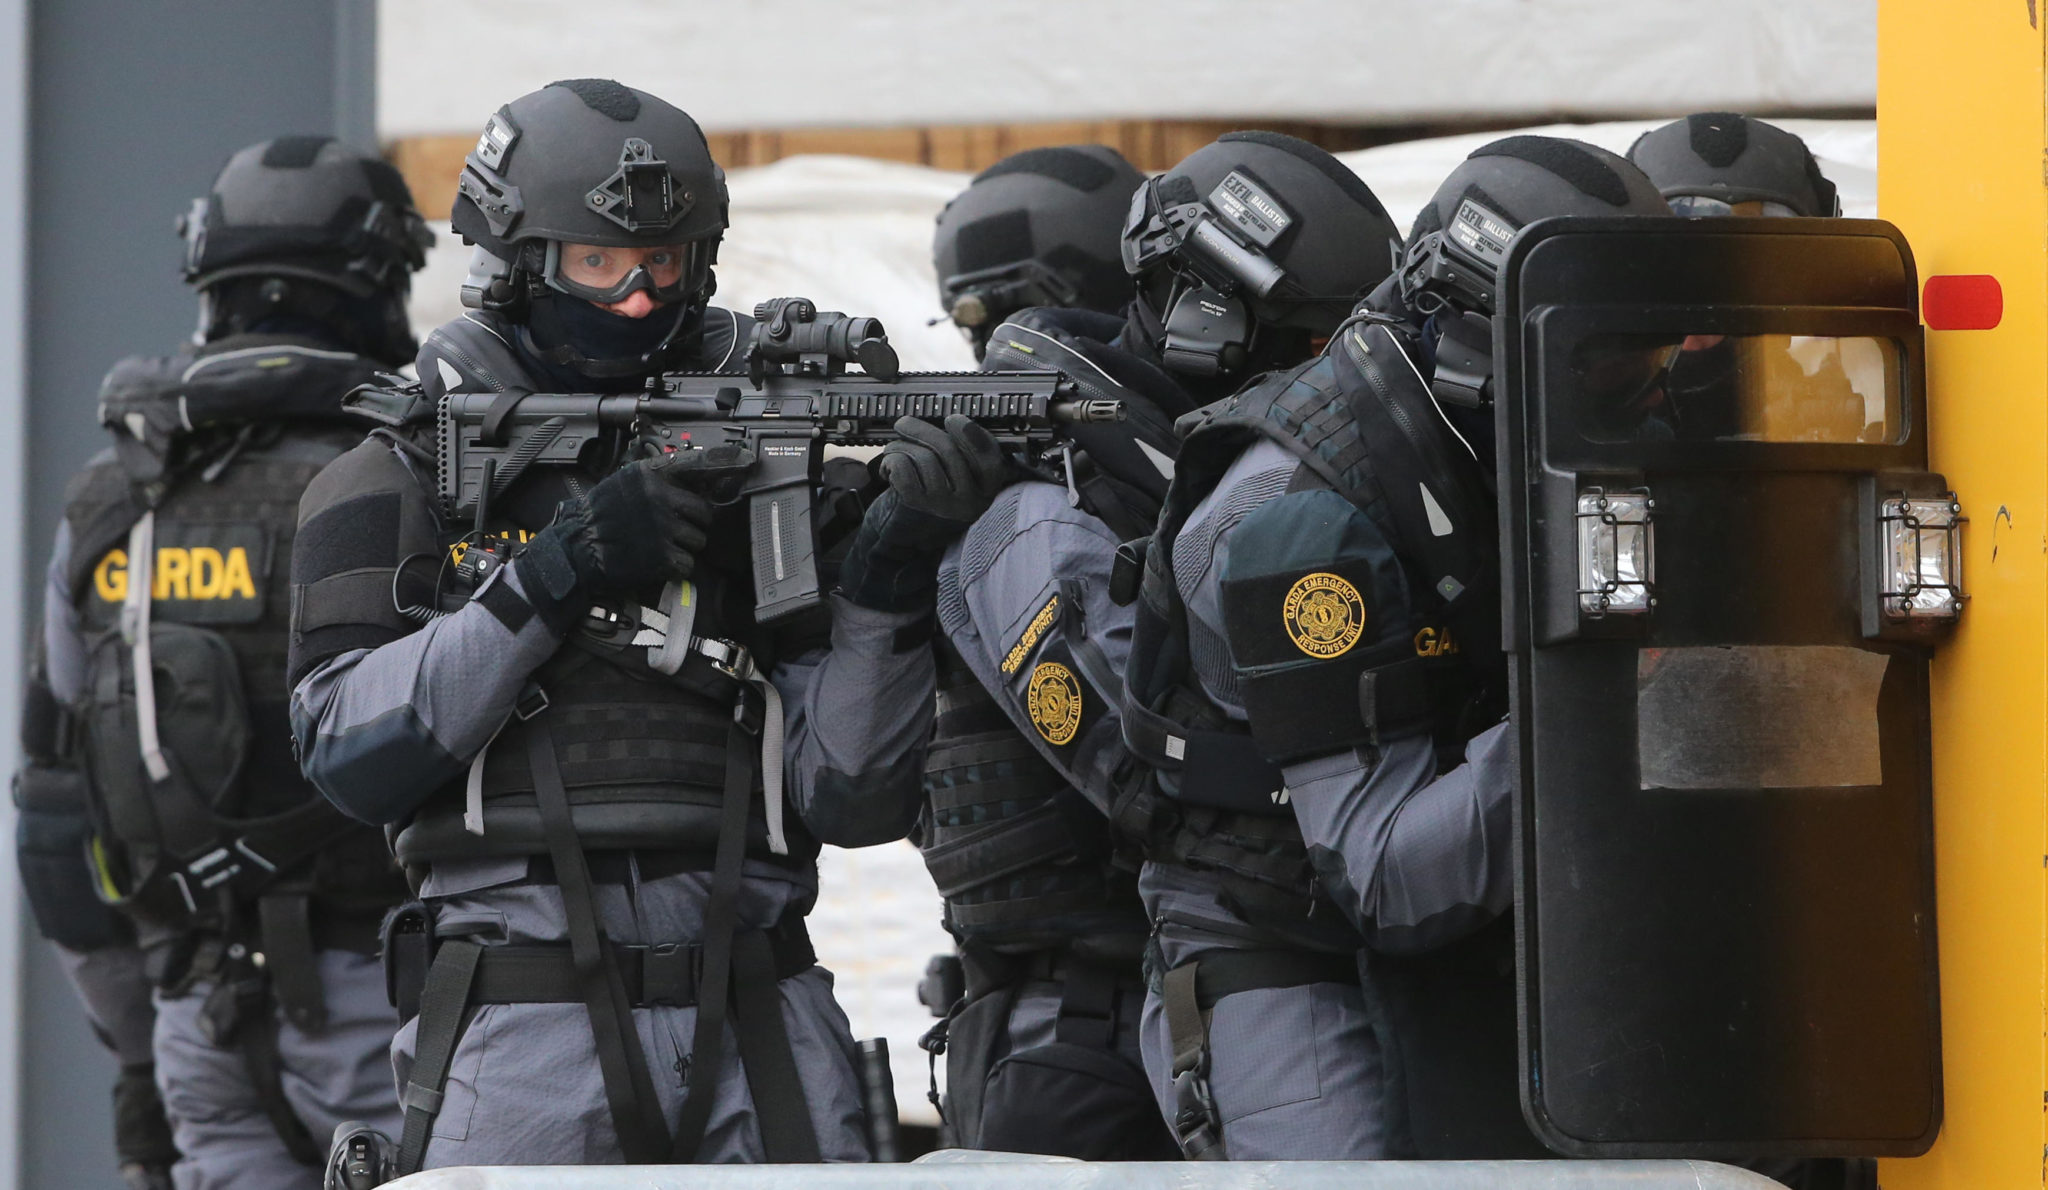 Members of the Garda Emergency Response Unit and Regional Armed Support Units taking part in a major emergency training exercise in October 2016